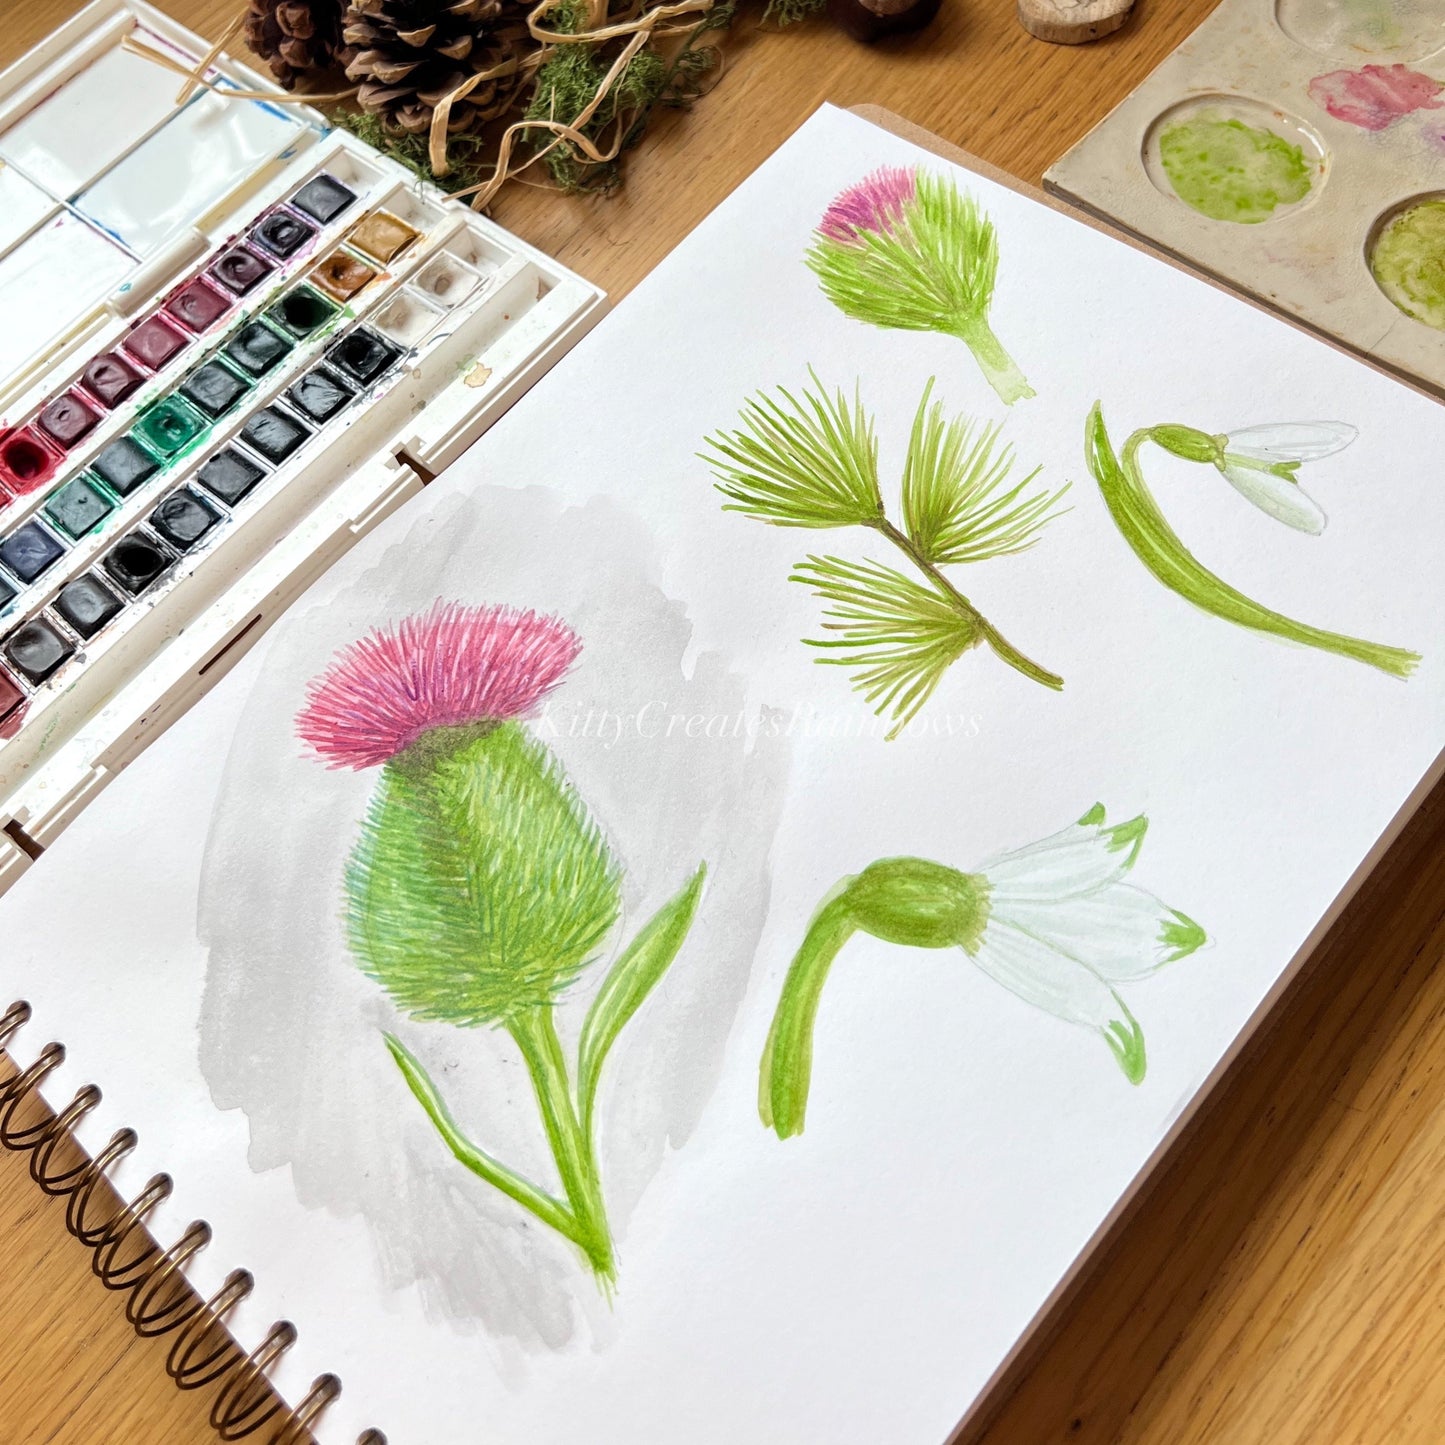 Watercolour sketches of thistle and snowdrops by Kat Lovatt